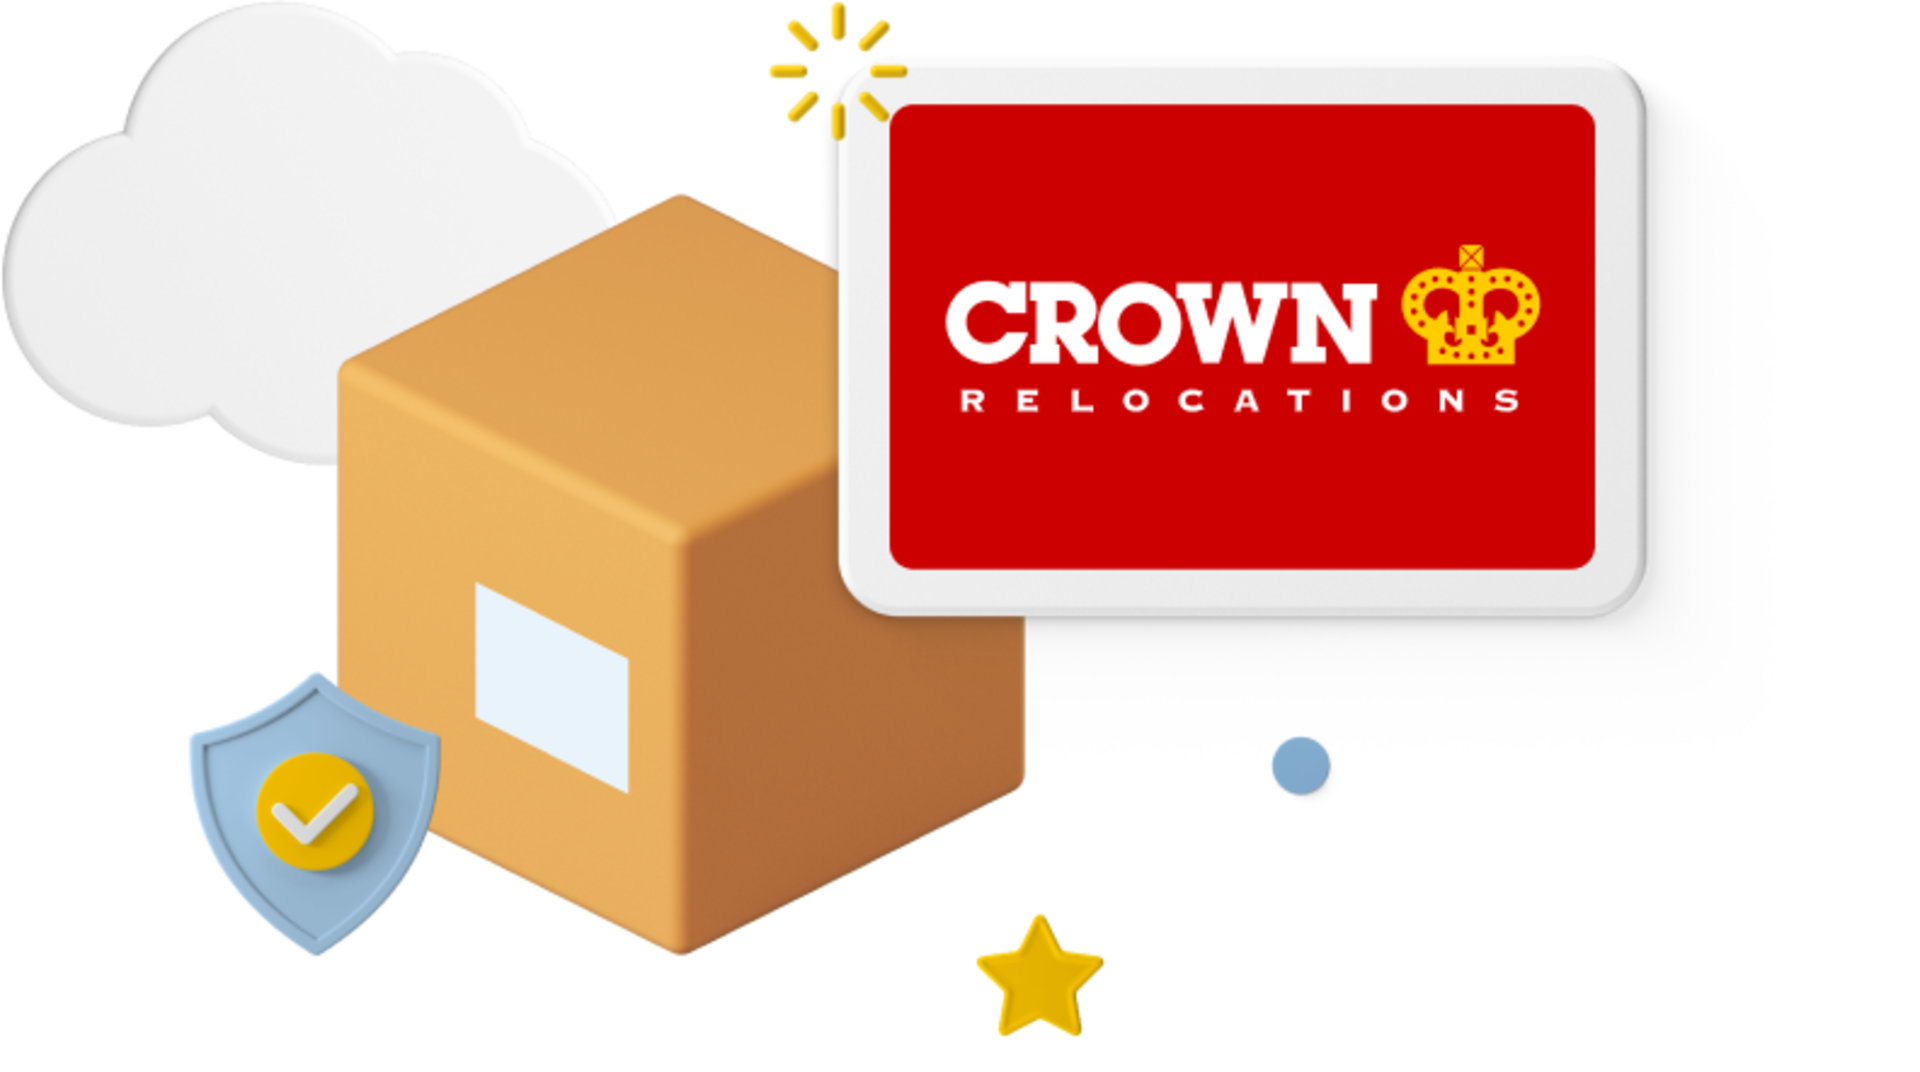 Crown Relocations logo on animated cardboard box with icons